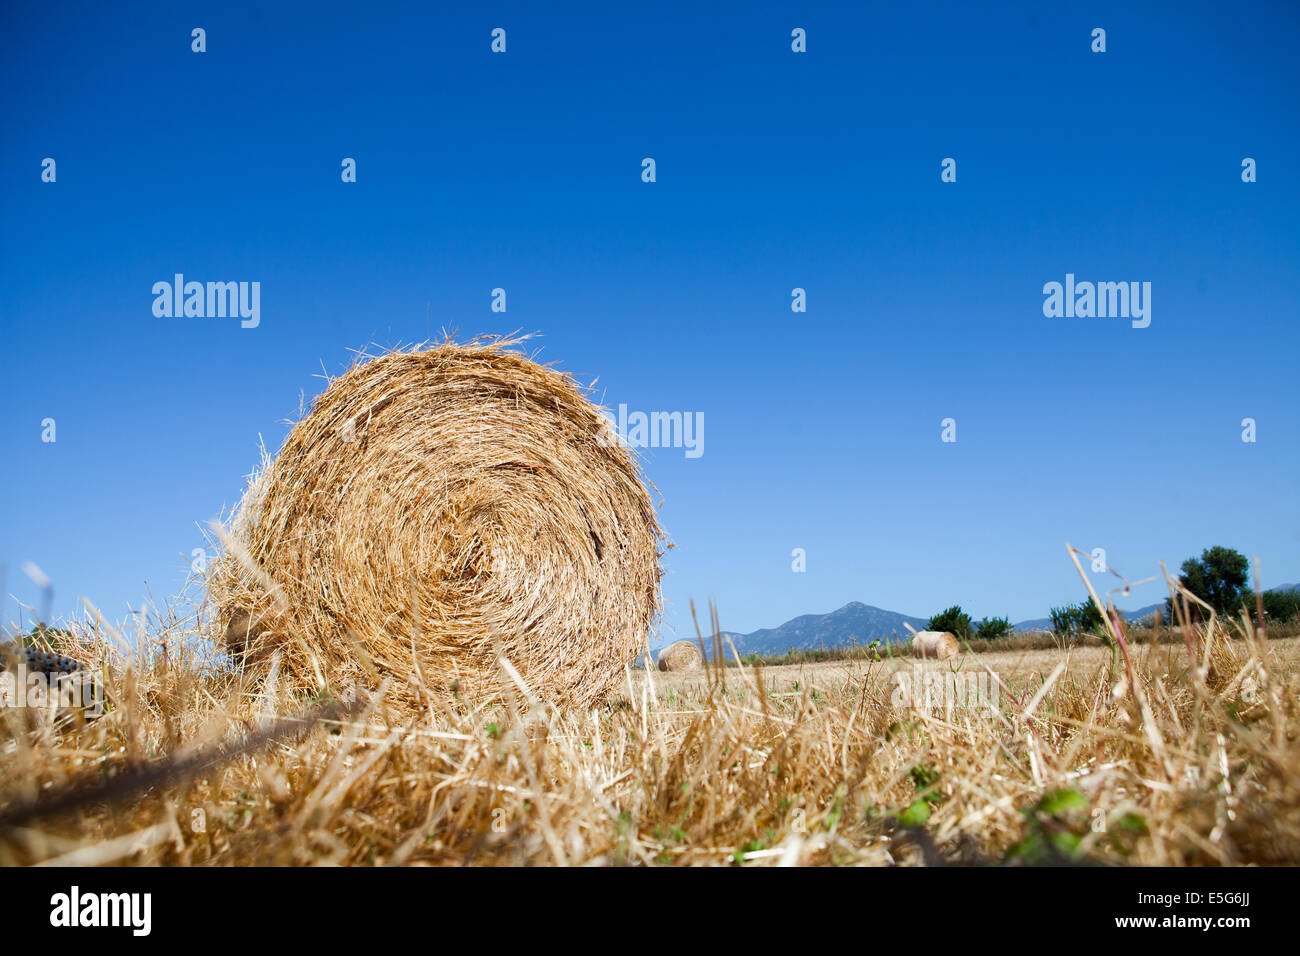 Hay bale in a field in Sardinia, Italy Stock Photo